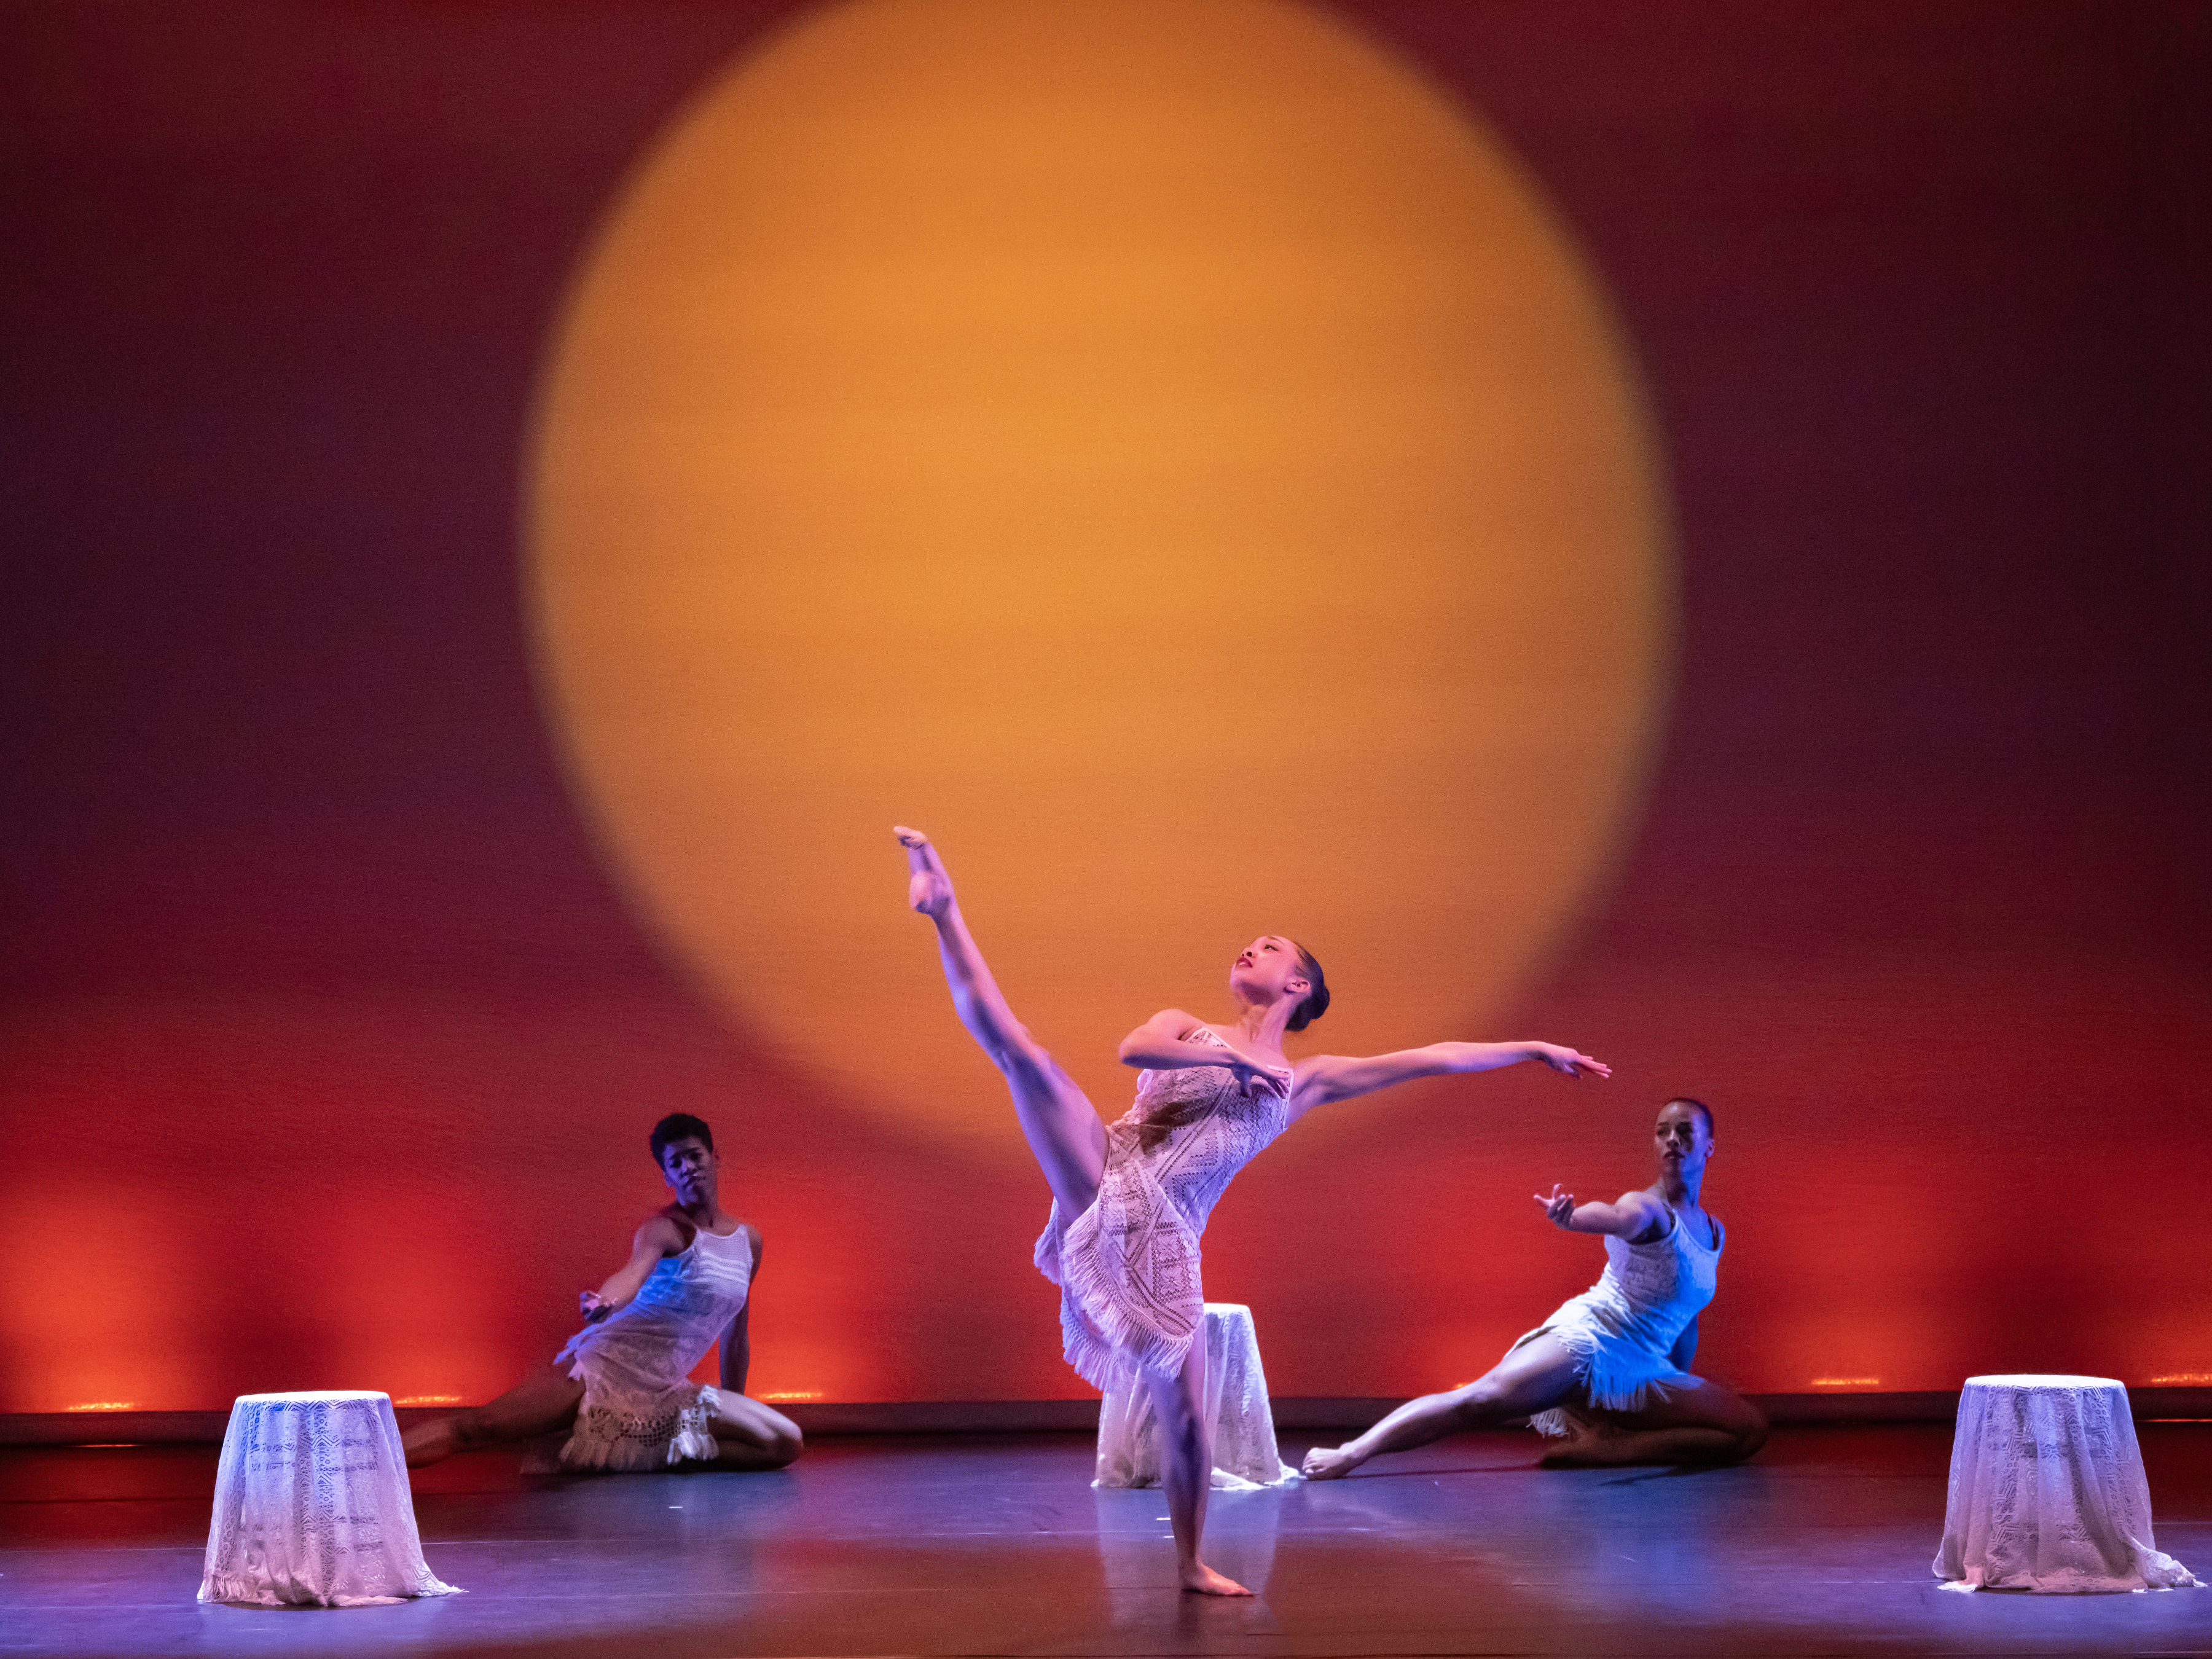 A dancer kicks while two other dancers crouch on a stage with a backdrop that looks like a setting sun